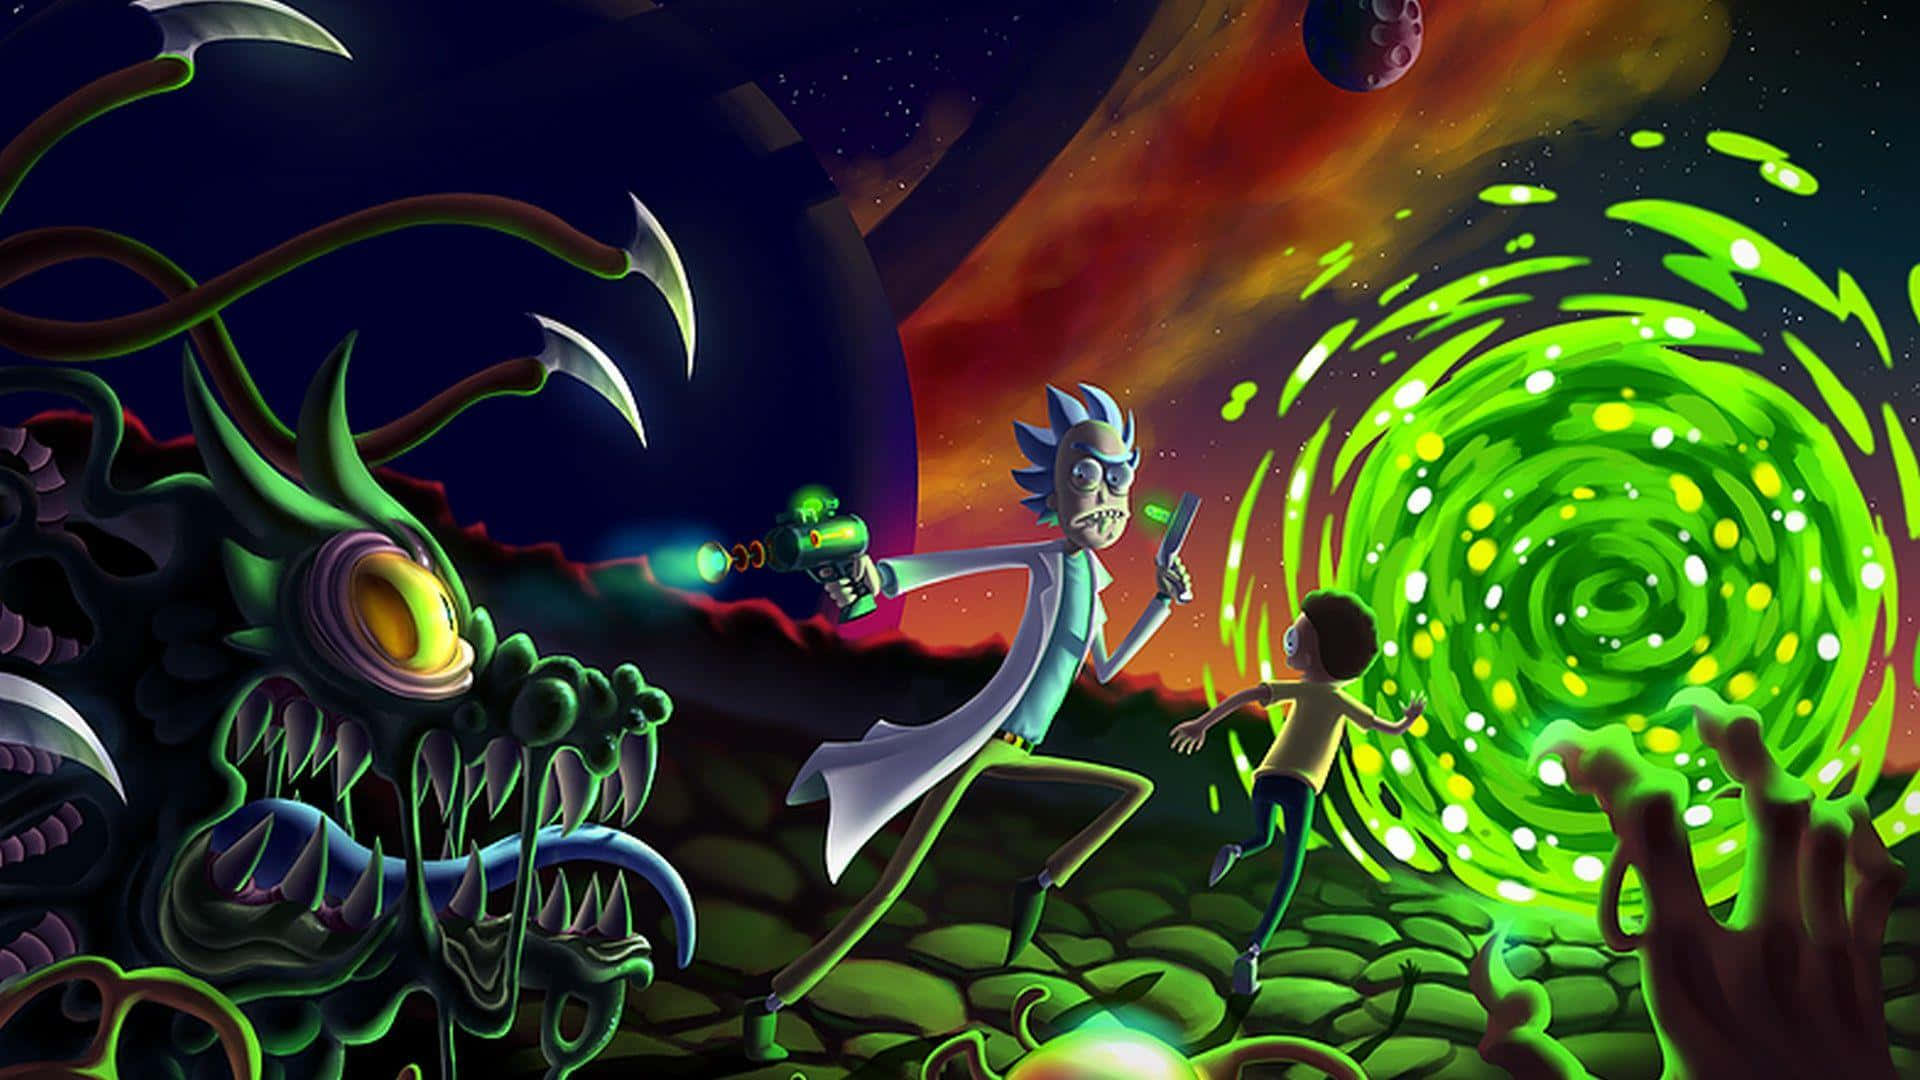 The Adventure of a Lifetime! Join Morty Smith as he embarks on an inter-dimensional journey. Wallpaper